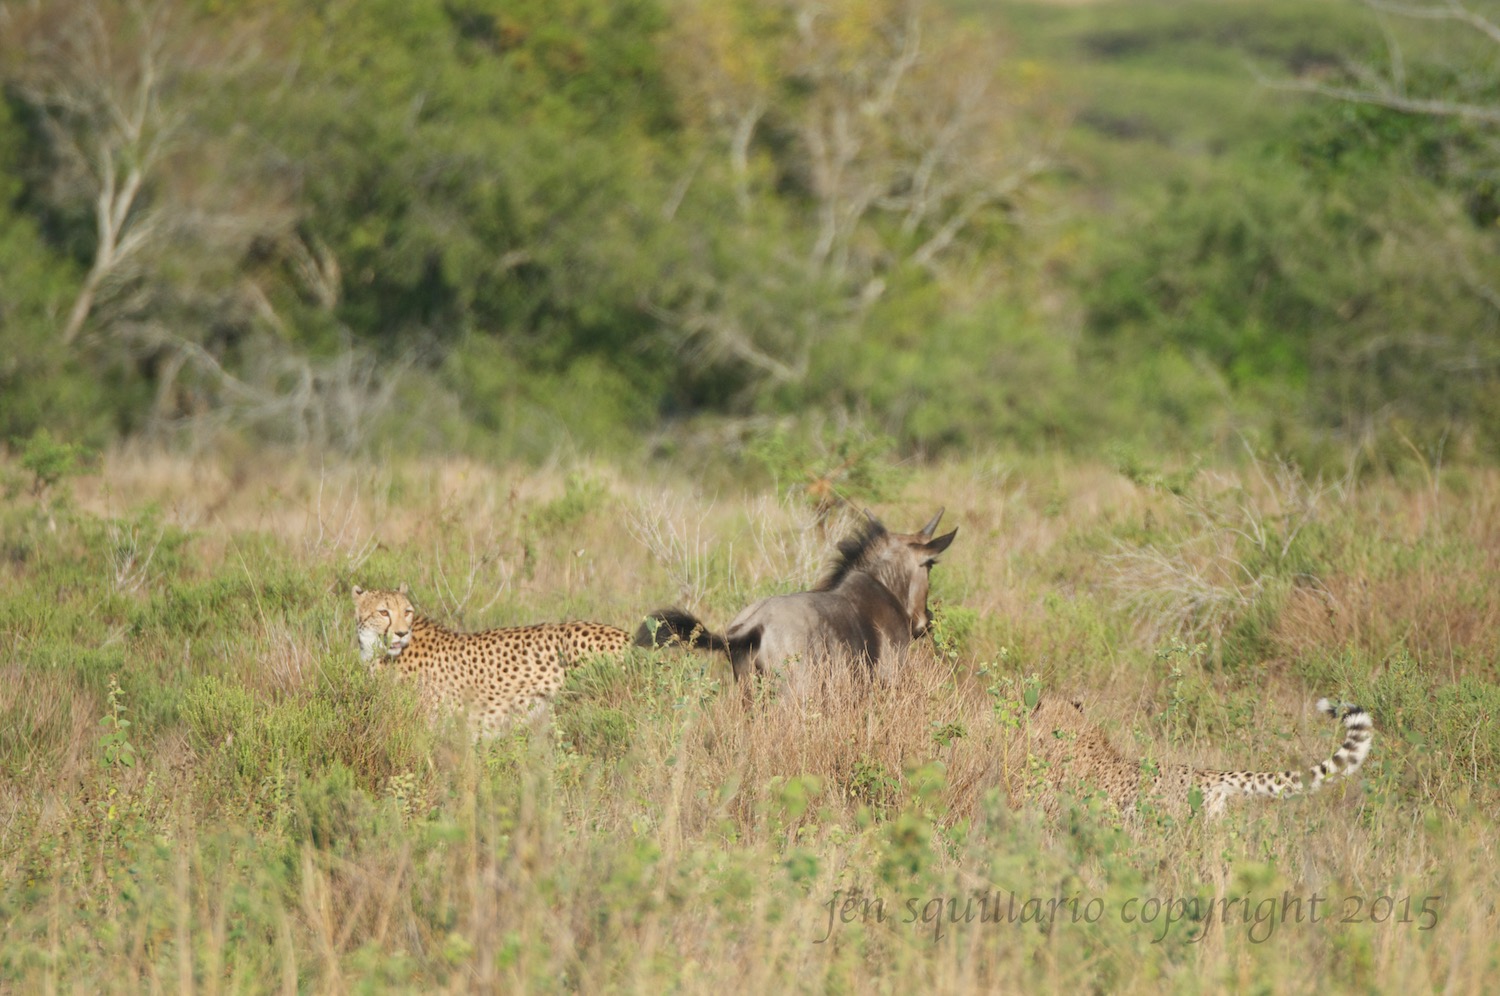  Young cheetah chasing wildebeest with mom looking on. 